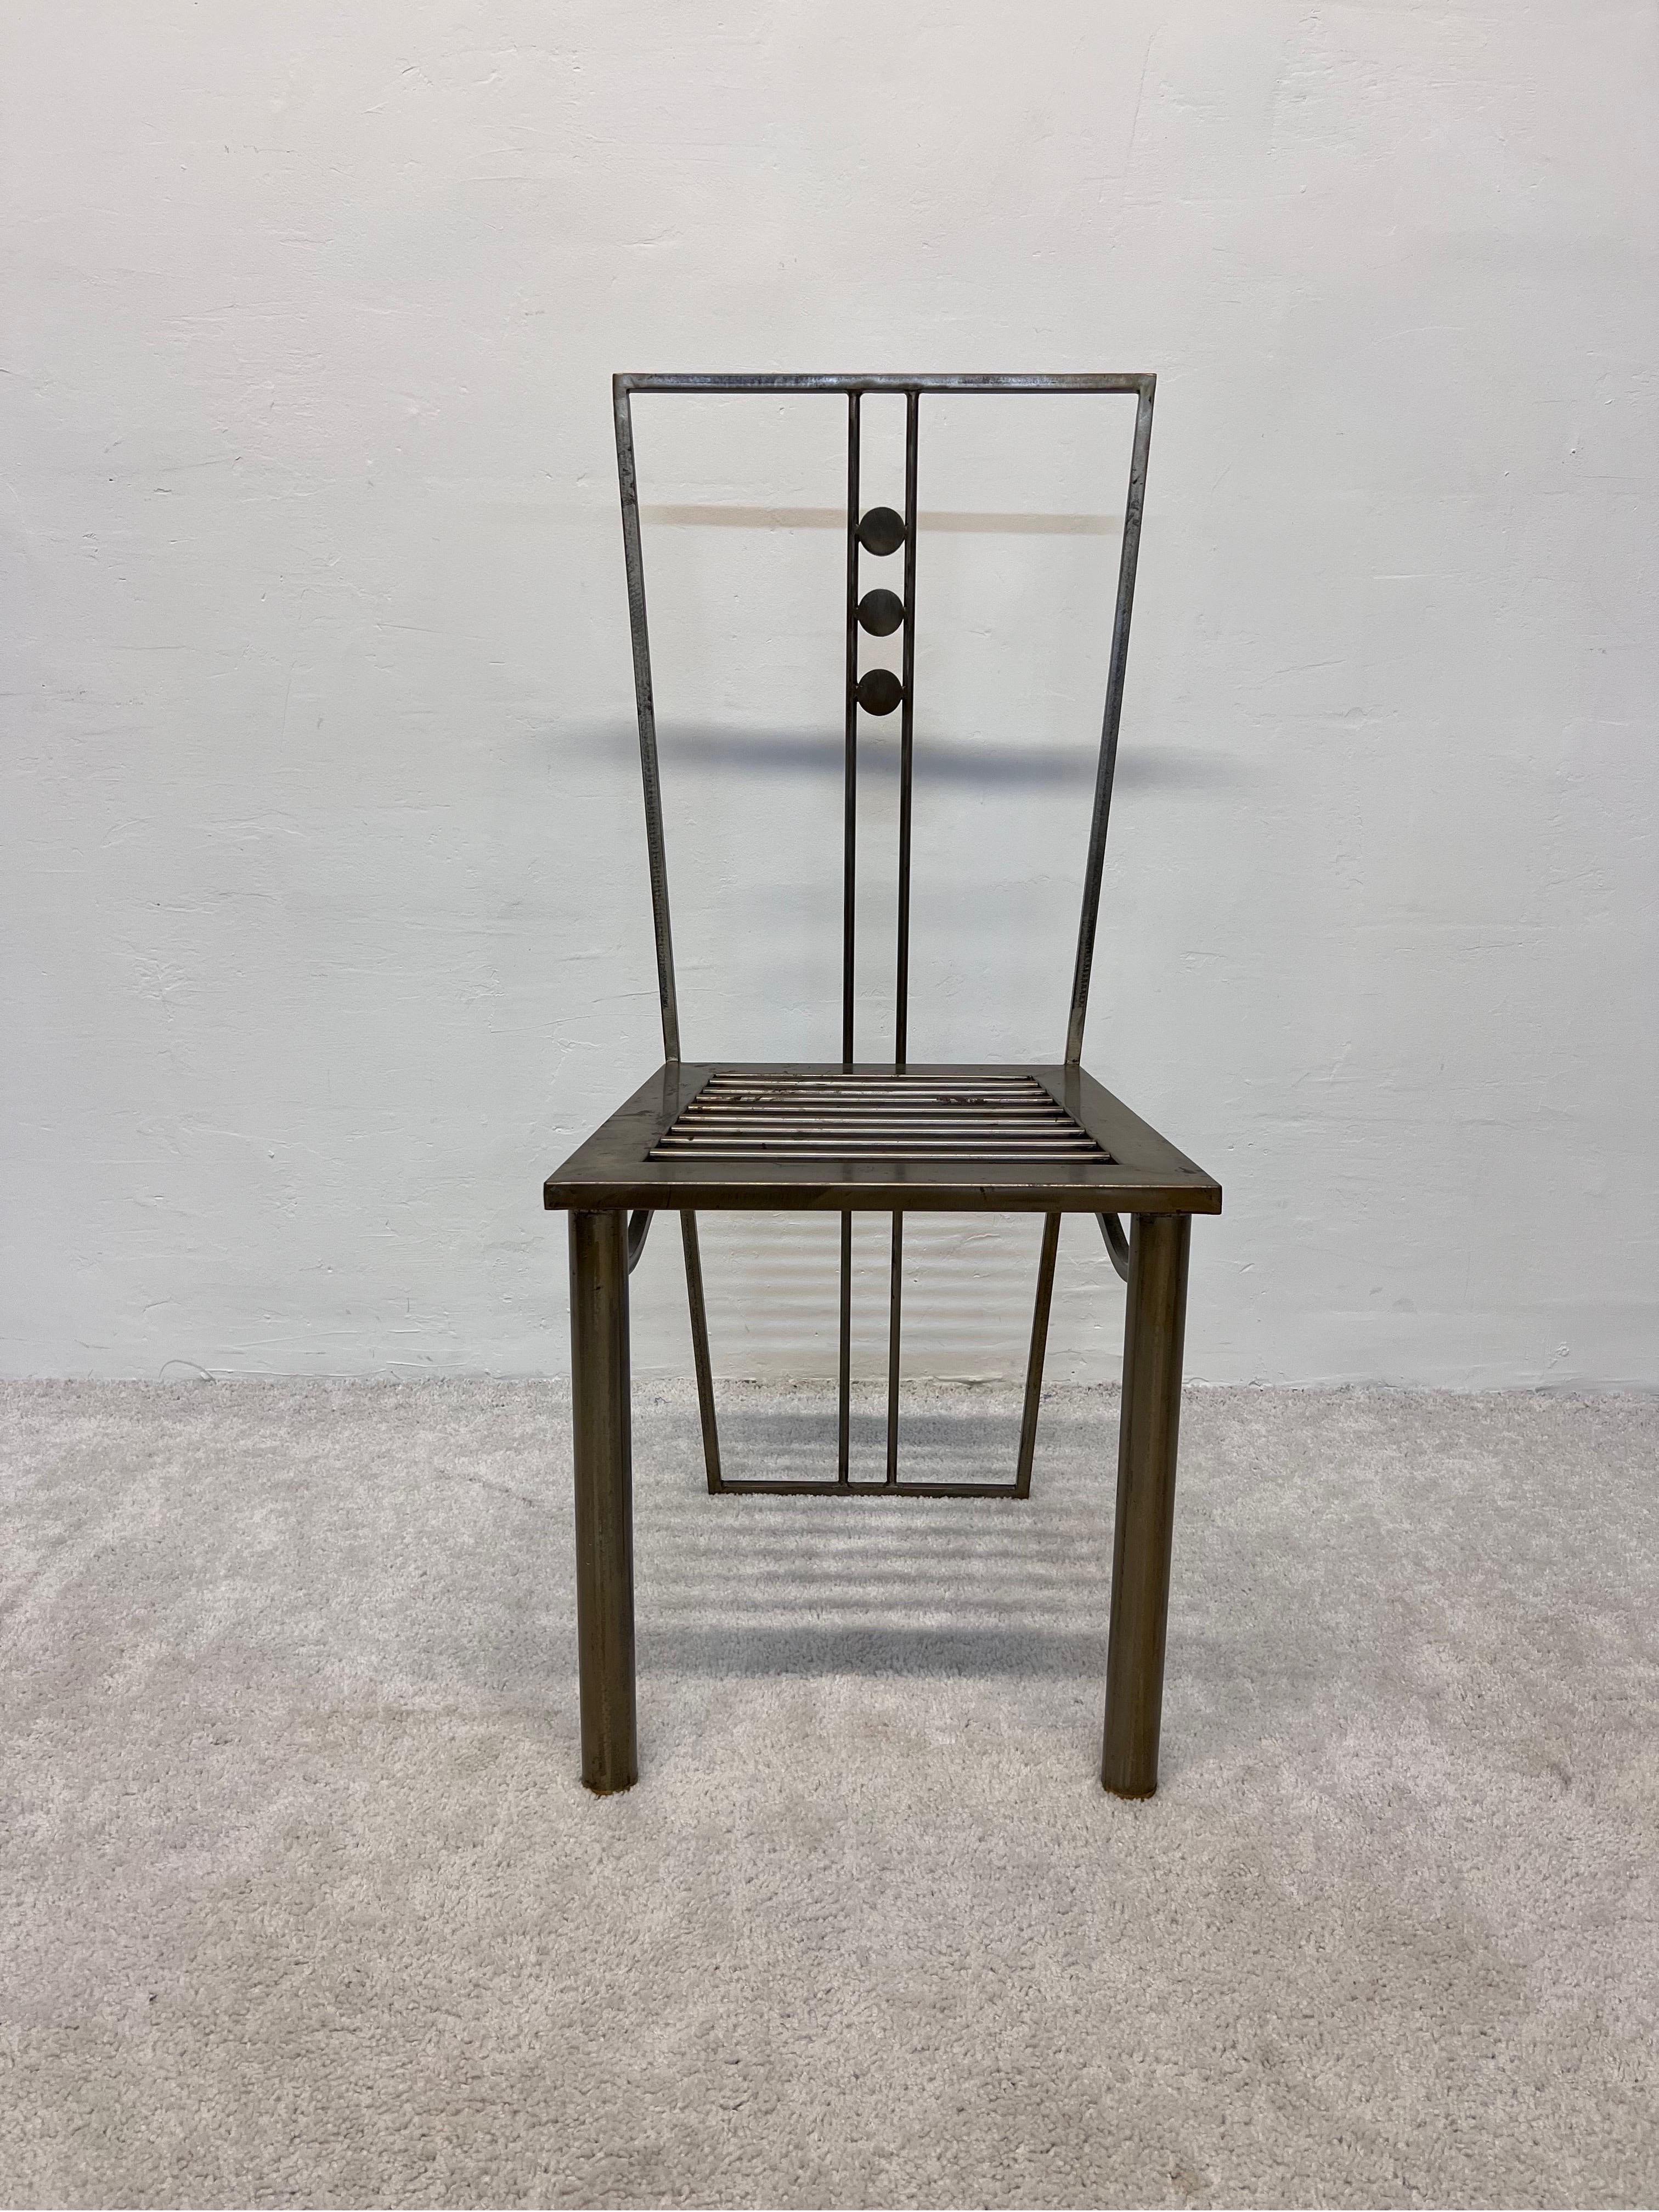 Postmodern artist designed contemporary welded steel dining, side or desk chair from the 1990s.